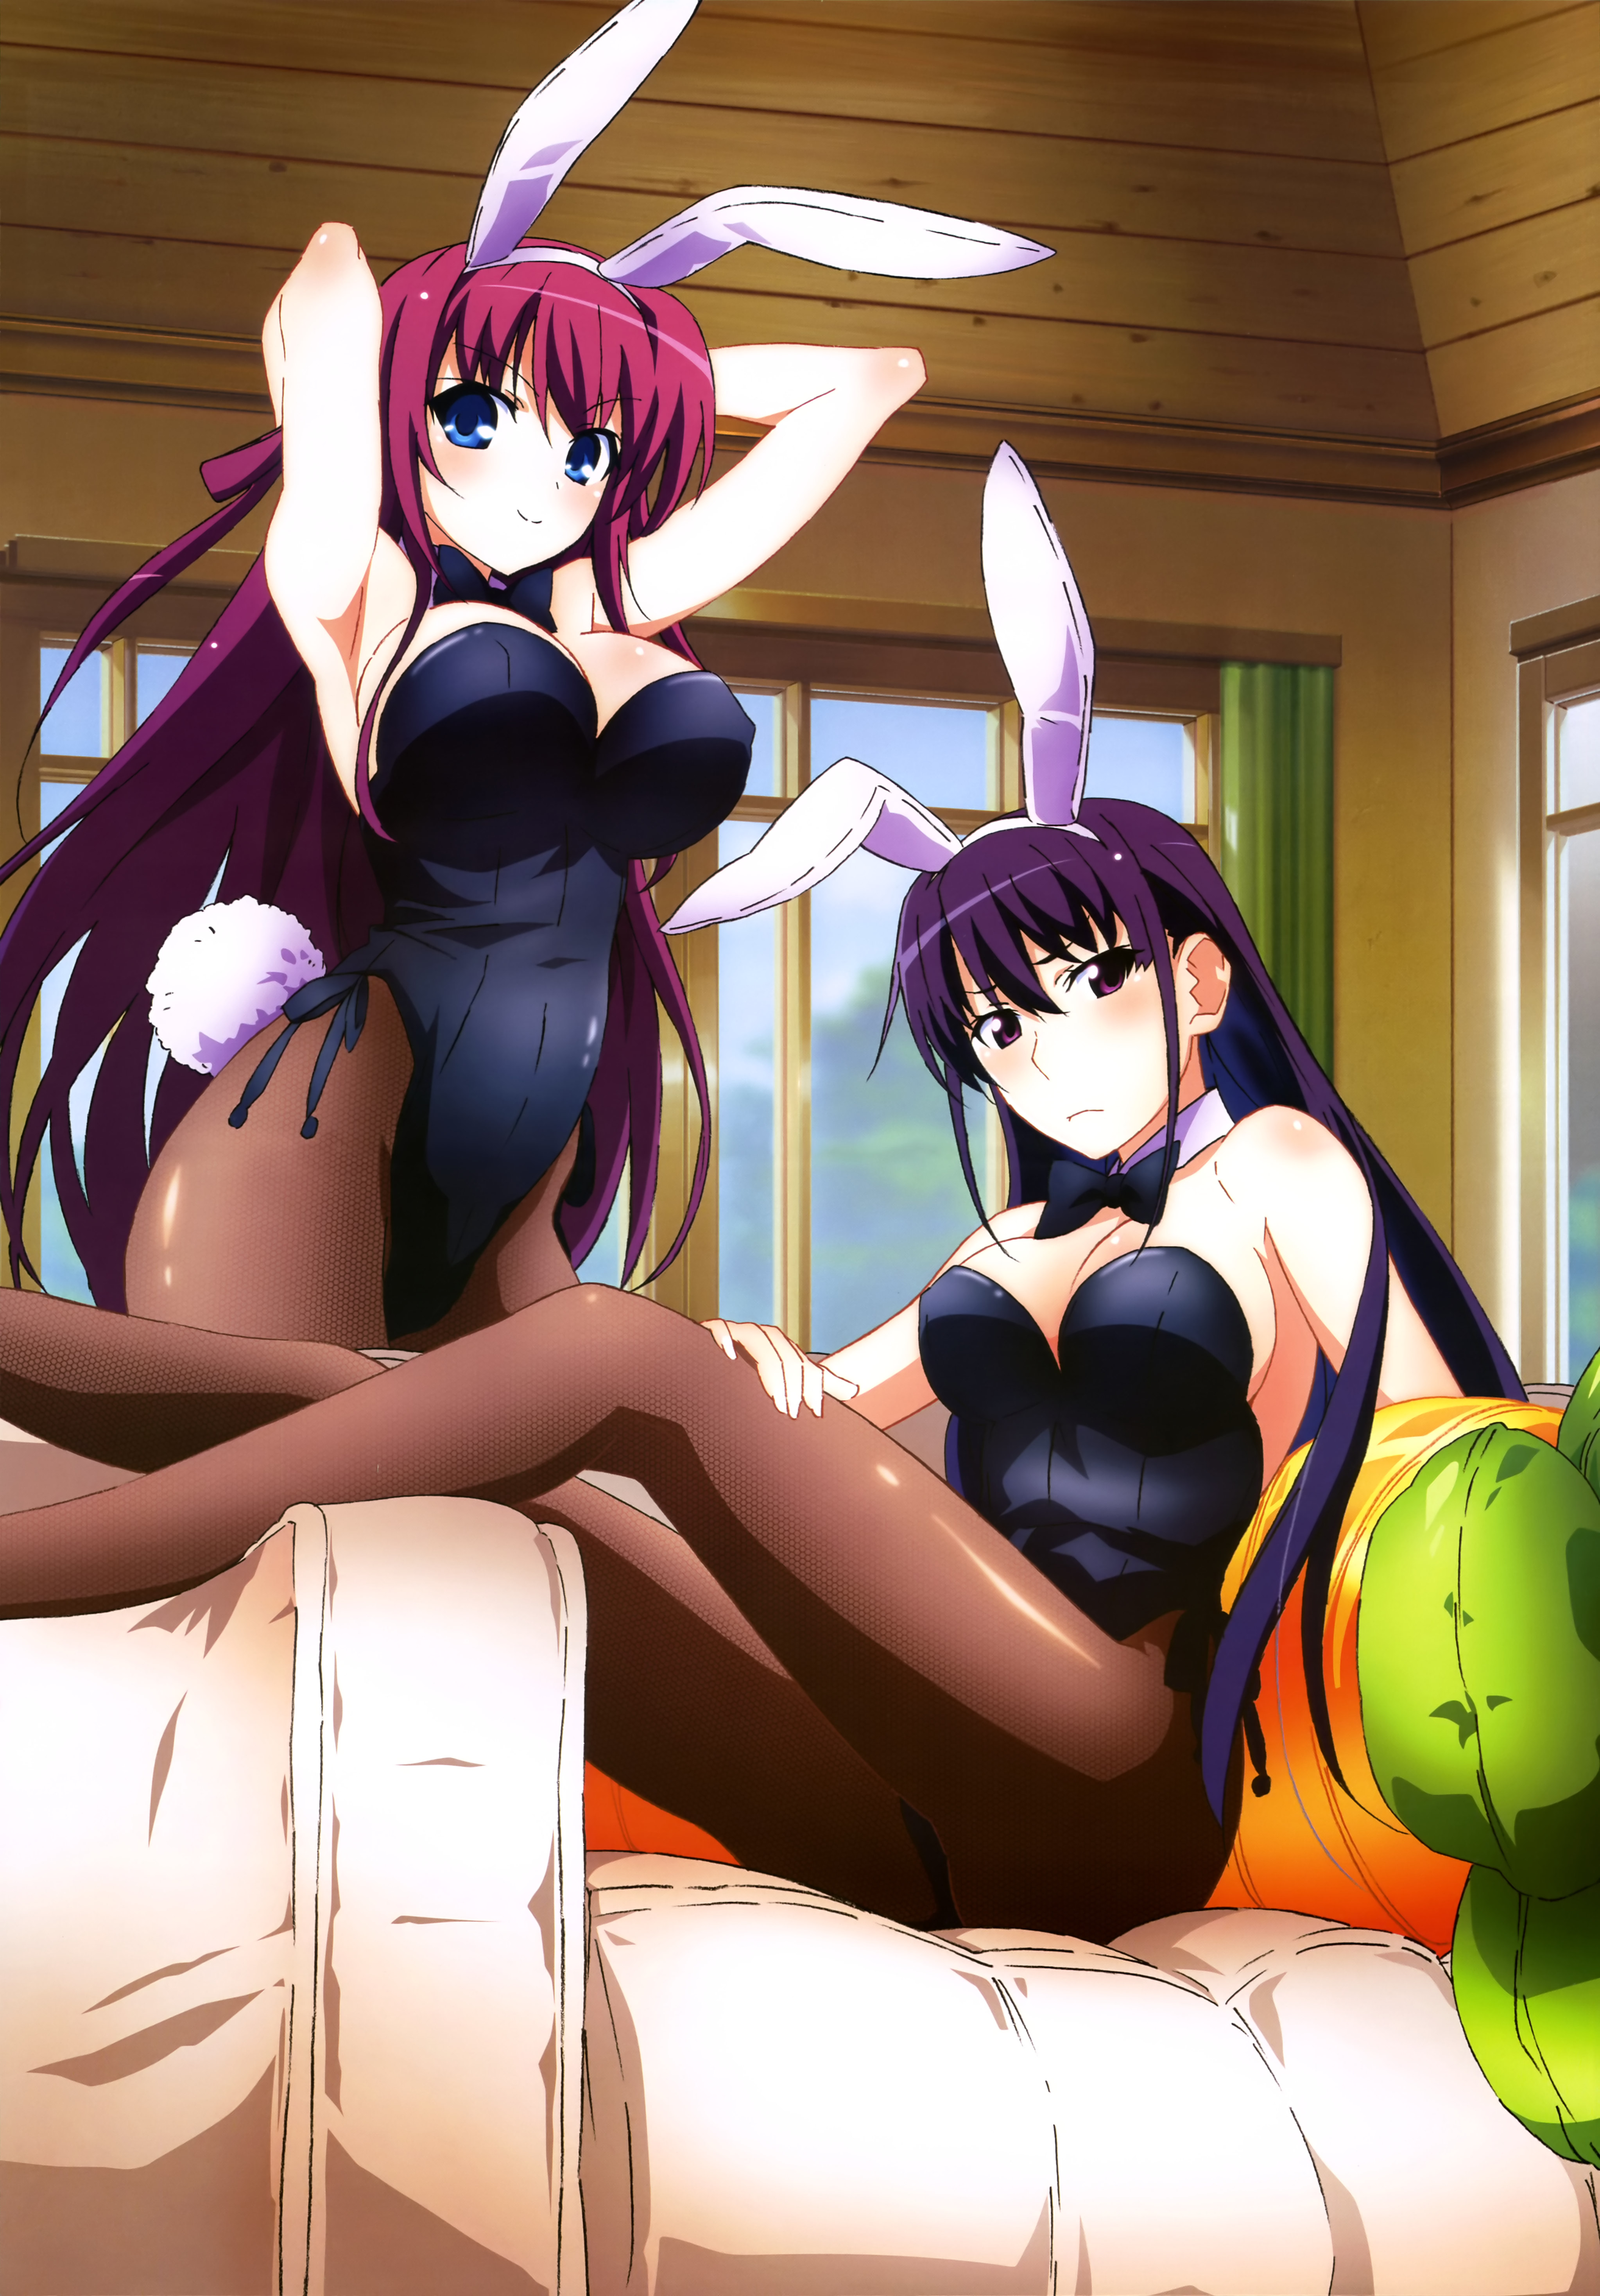 The Labyrinth of Grisaia (2012)